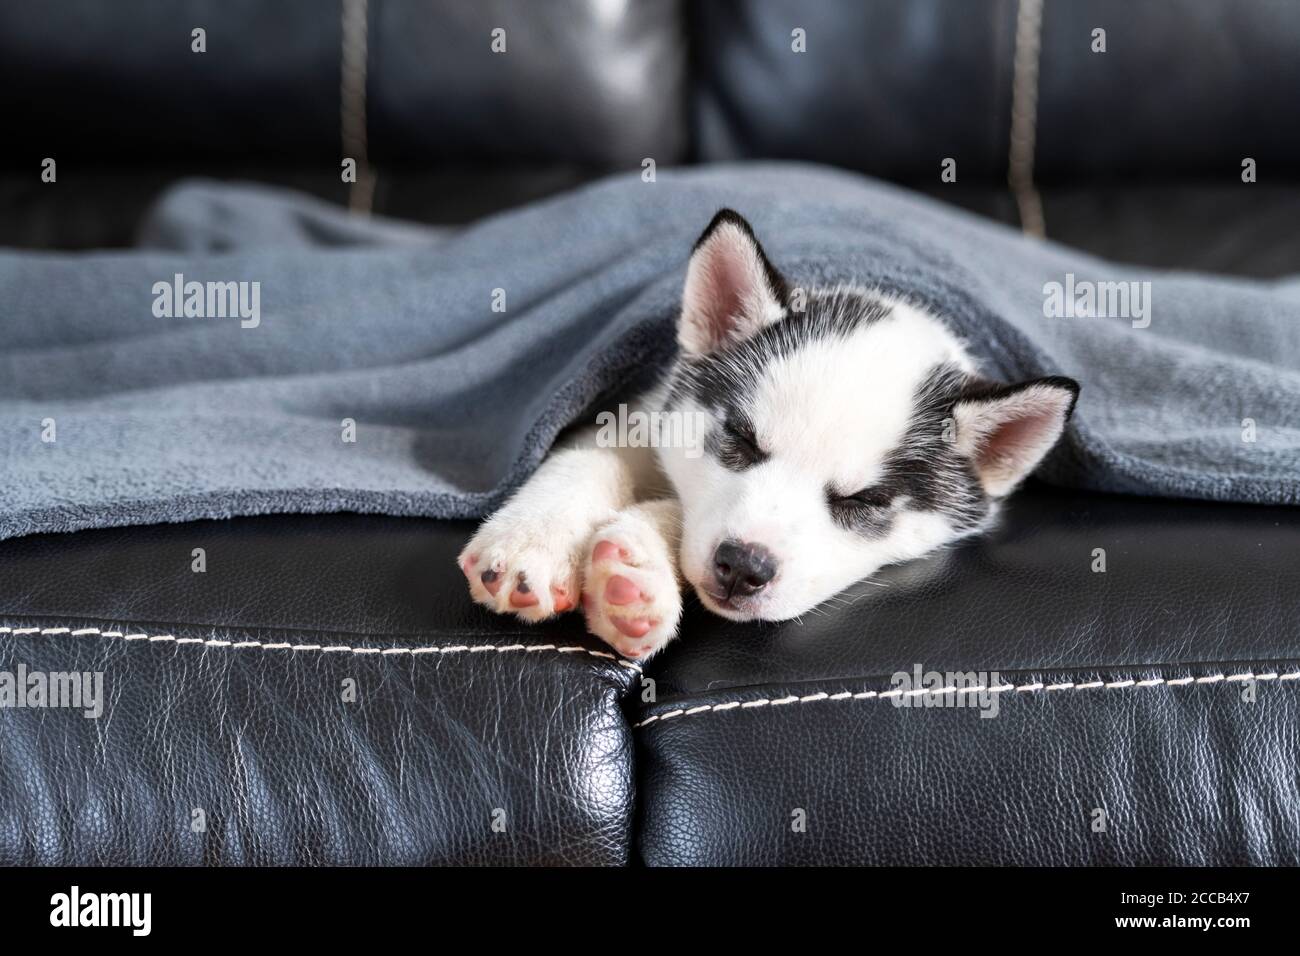 A small white dog puppy breed siberian husky with beautiful blue eyes sleep on leather sofa. Dogs and pet photography Stock Photo